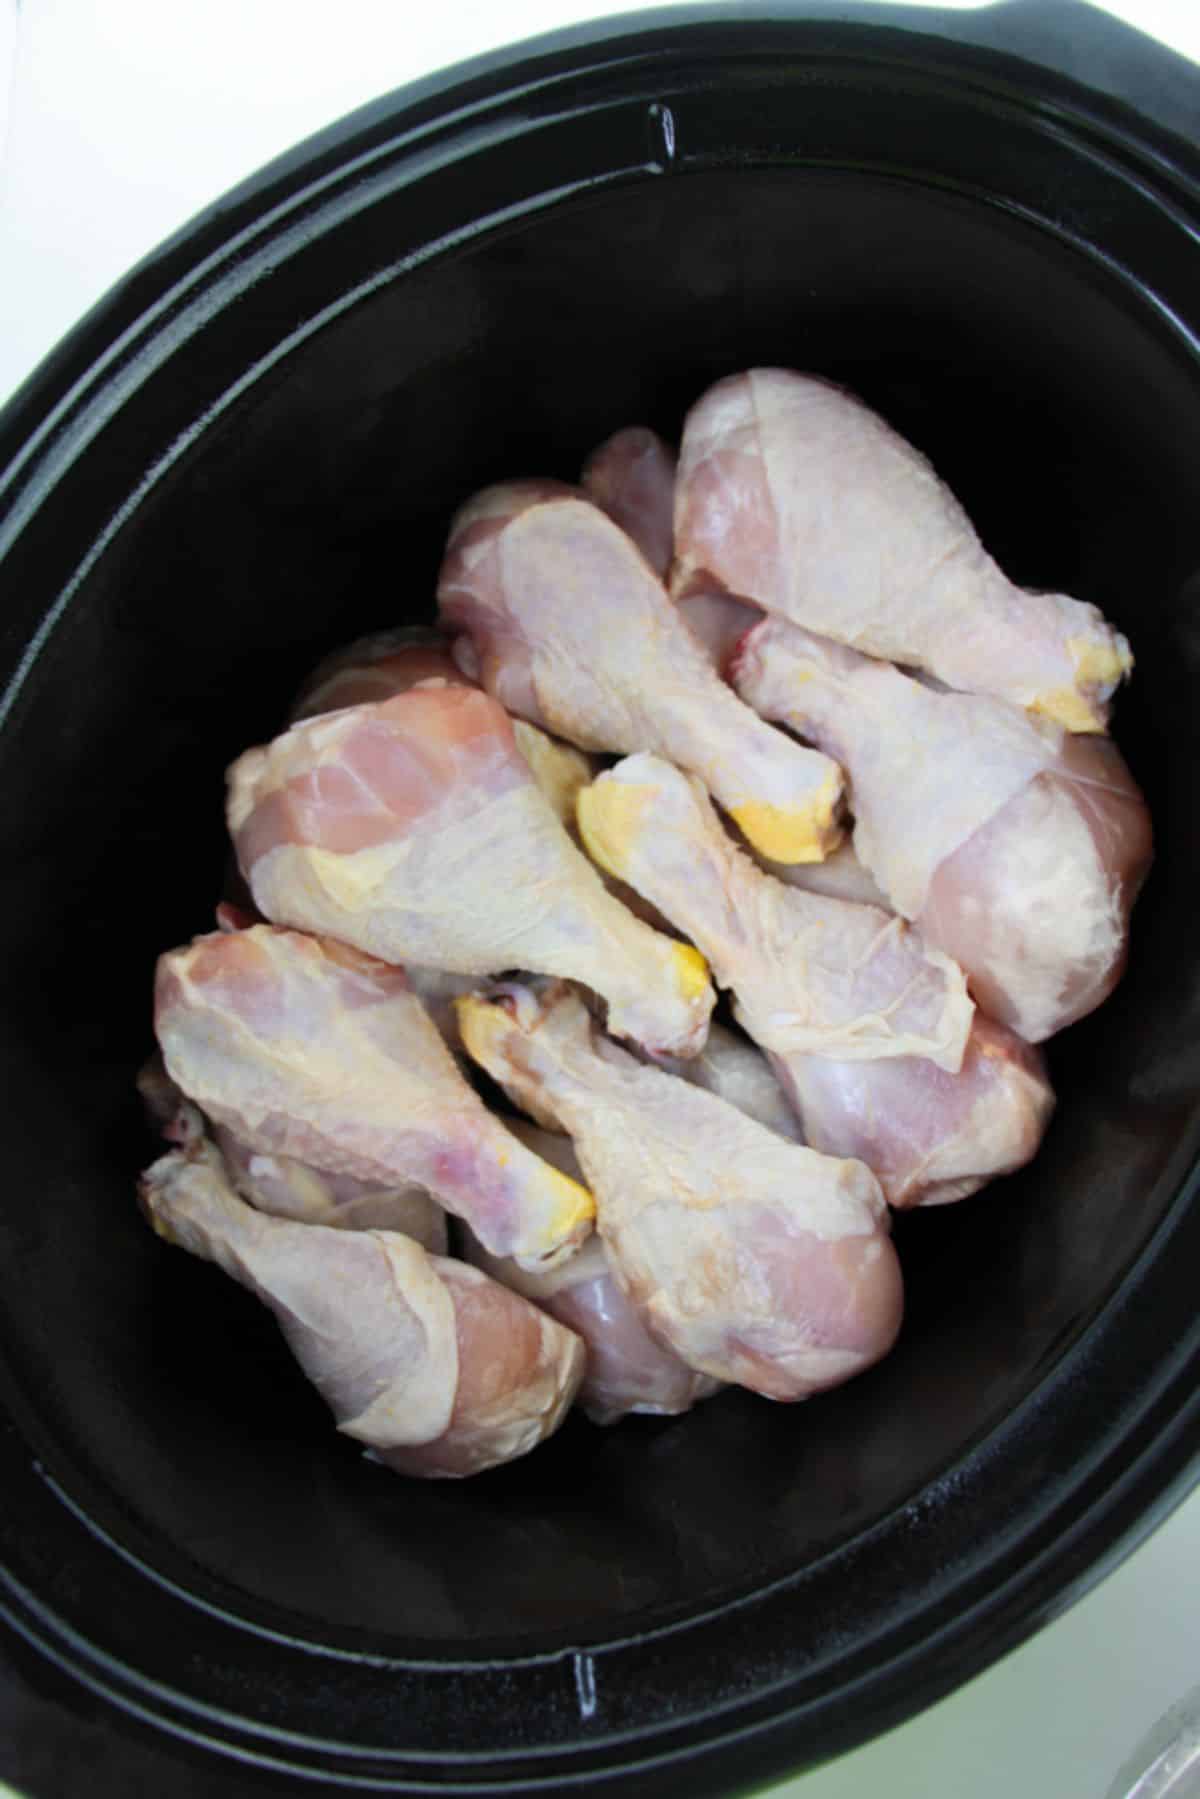 Chicken legs layered in slow cooker.